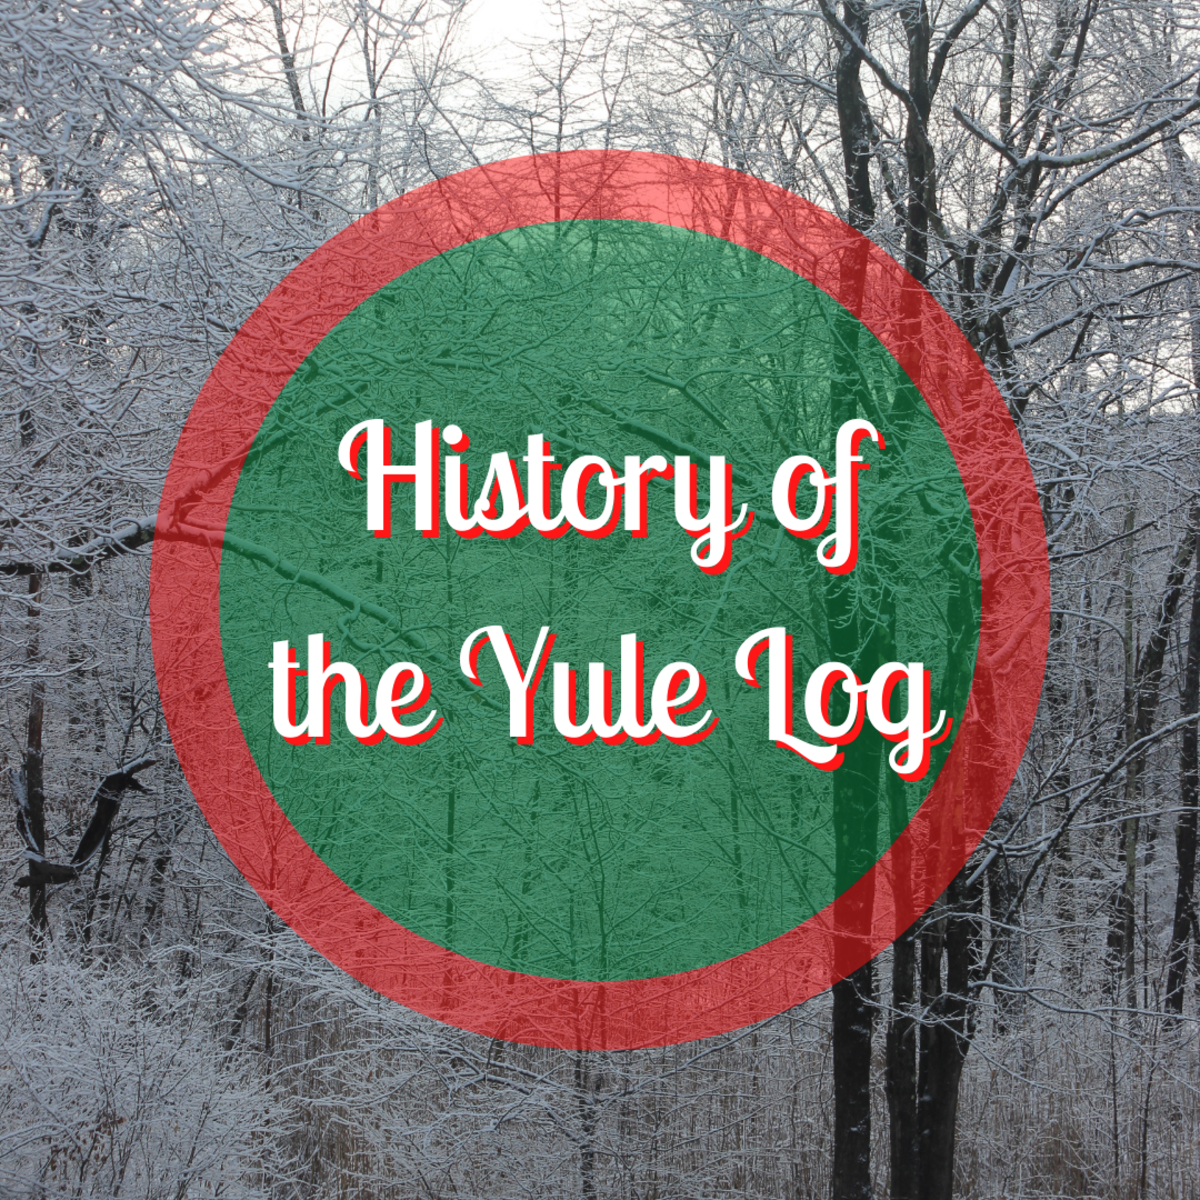 The History of Christmas Traditions: The Yule Log